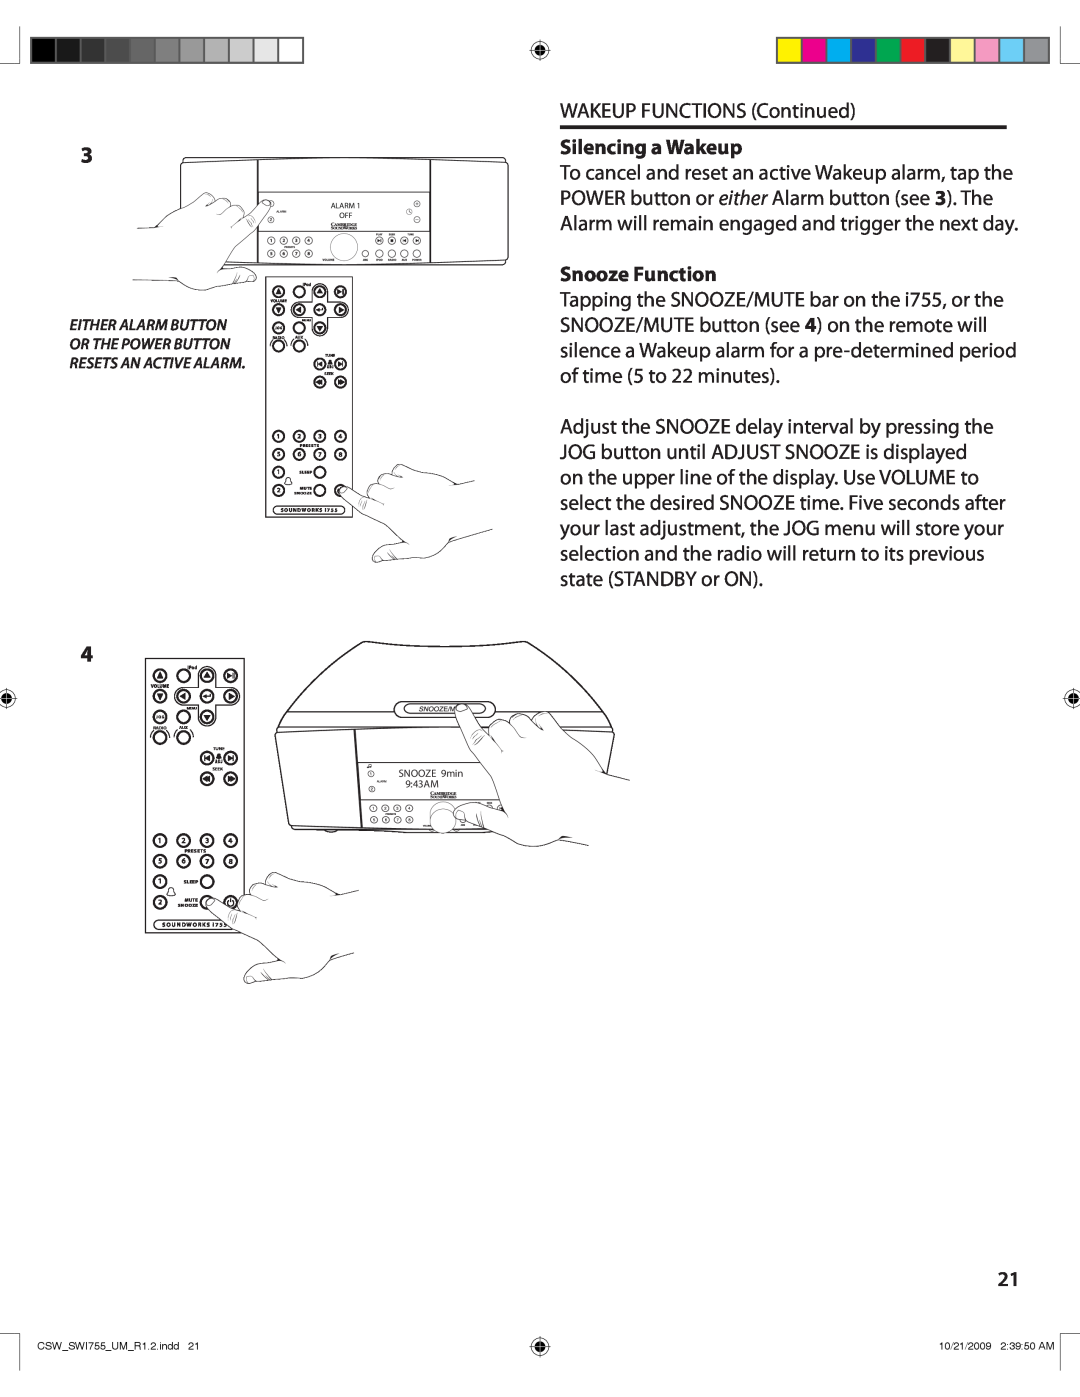 Cambridge SoundWorks I755 user manual Silencing a Wakeup, Snooze Function 